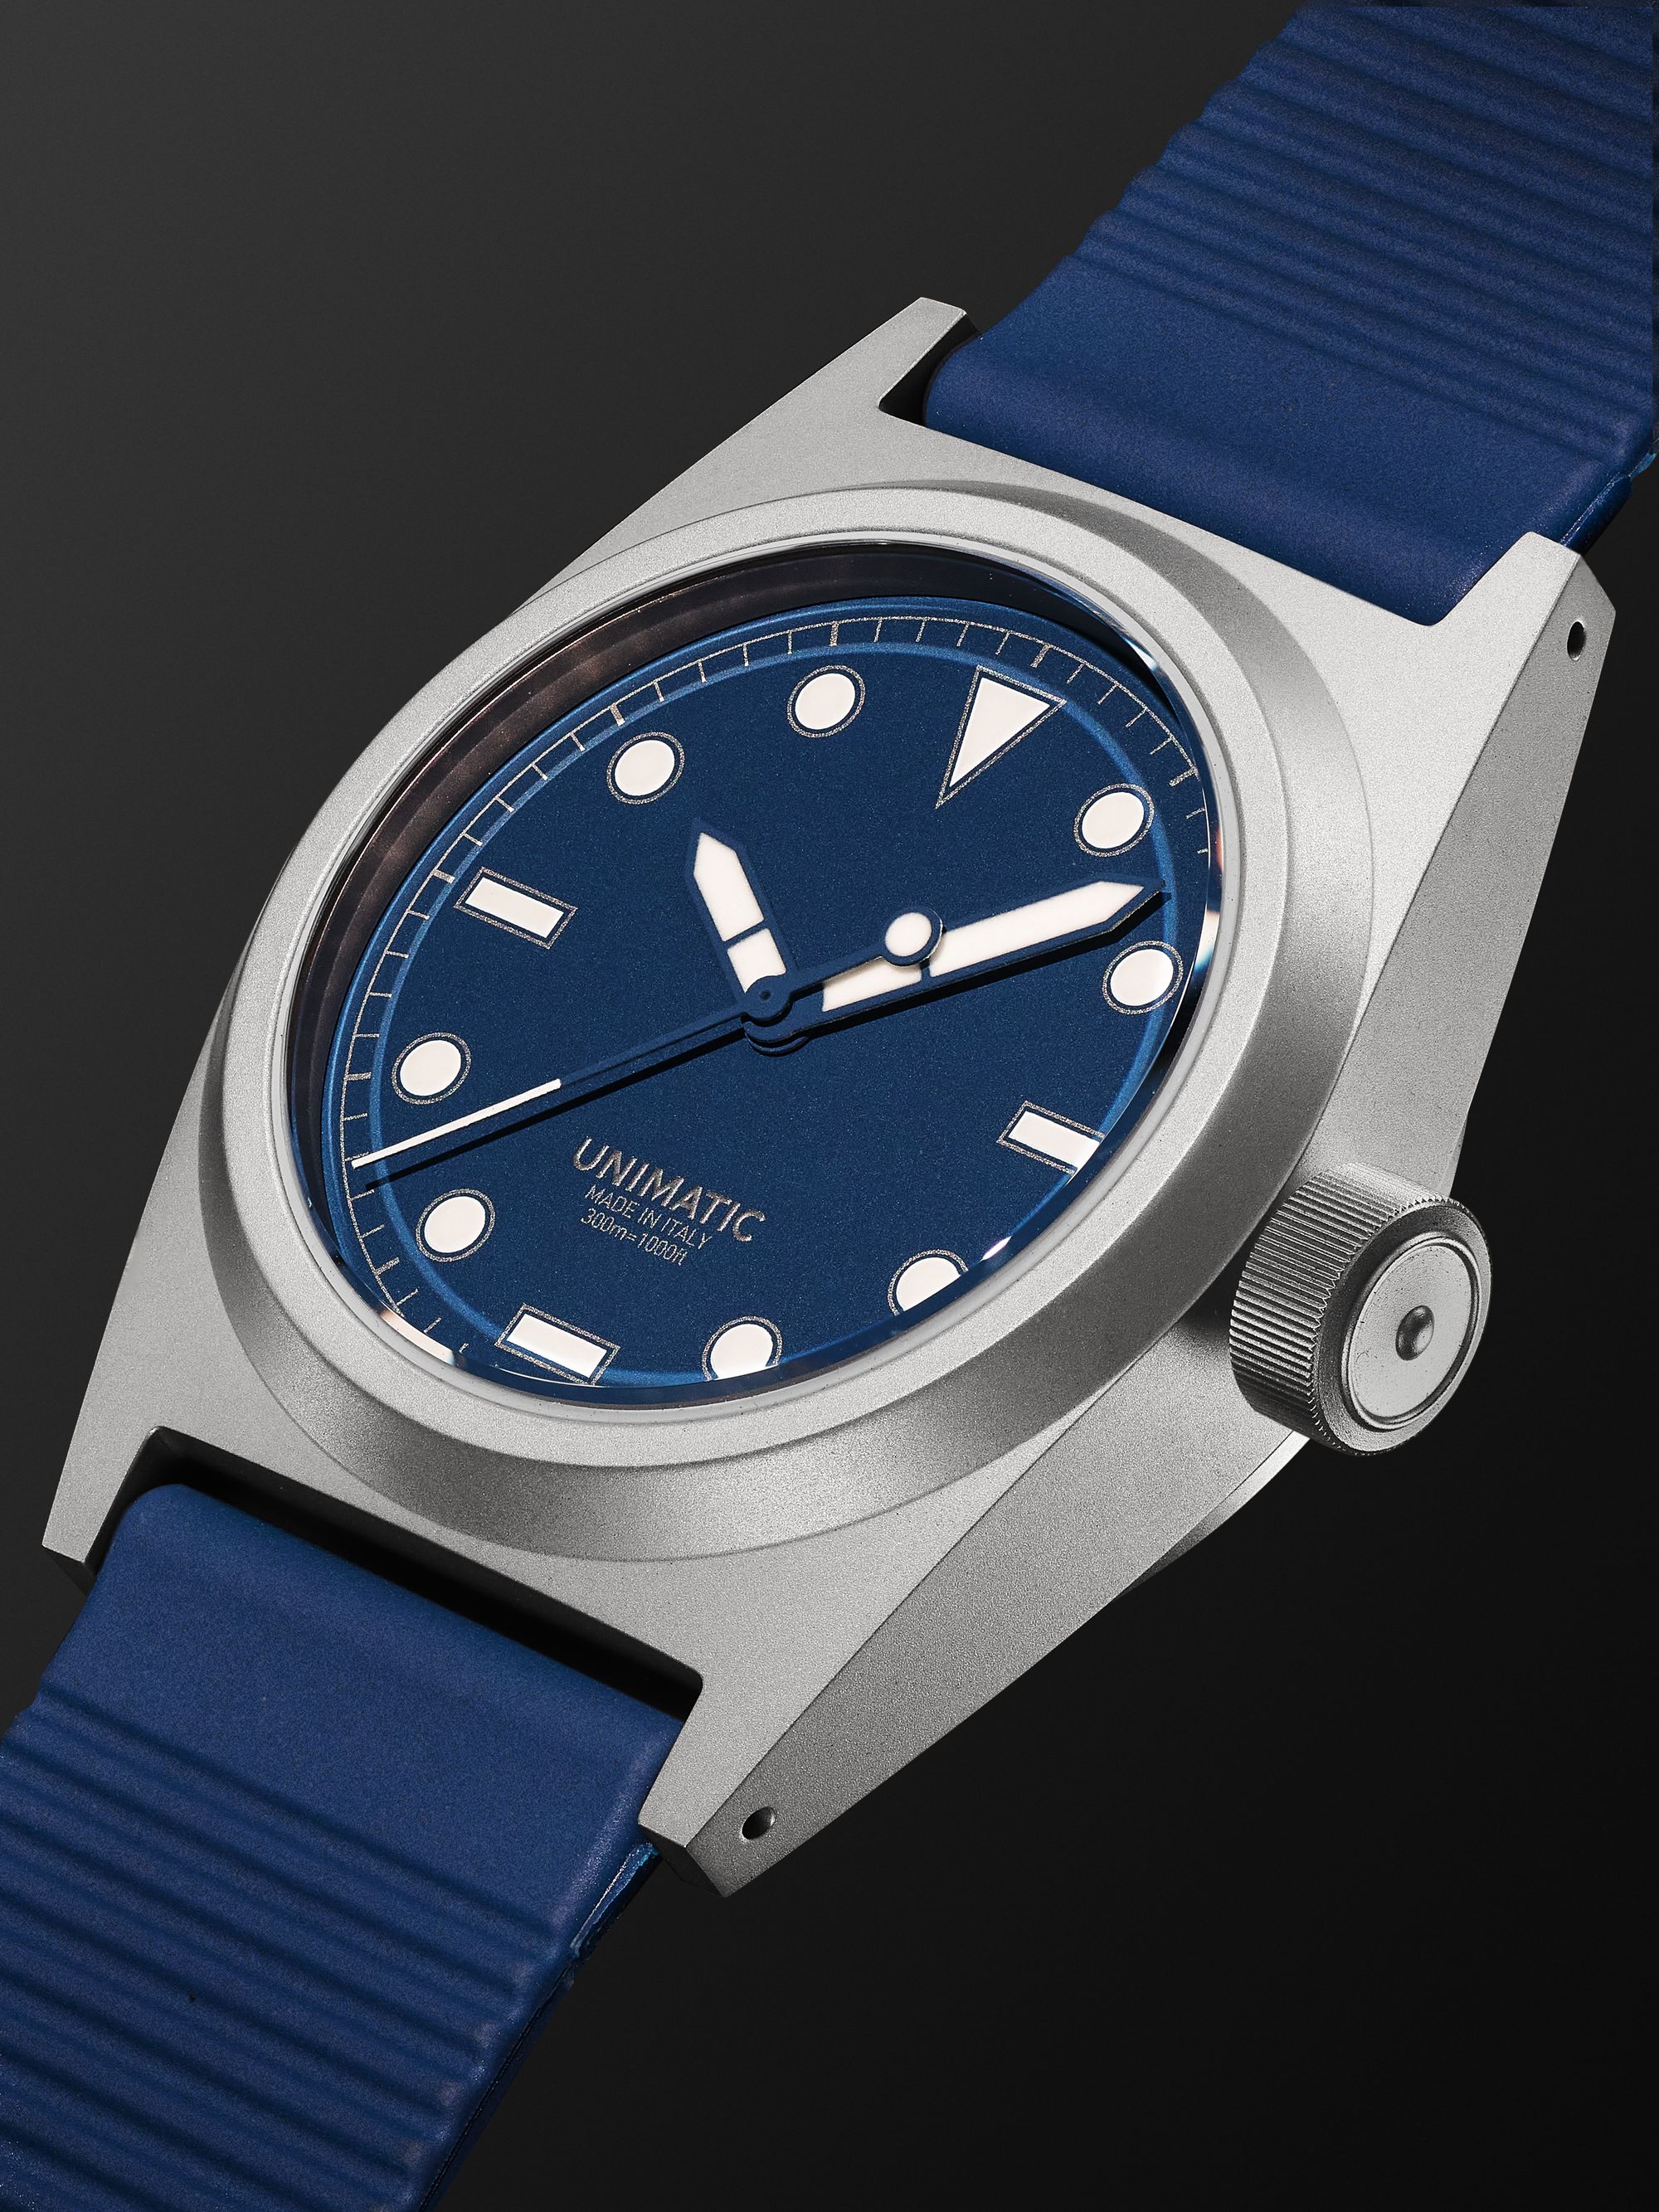 UNIMATIC Model Two Limited Edition Automatic 38mm Titanium and TPU Watch, Ref. No. U2S-T-MP